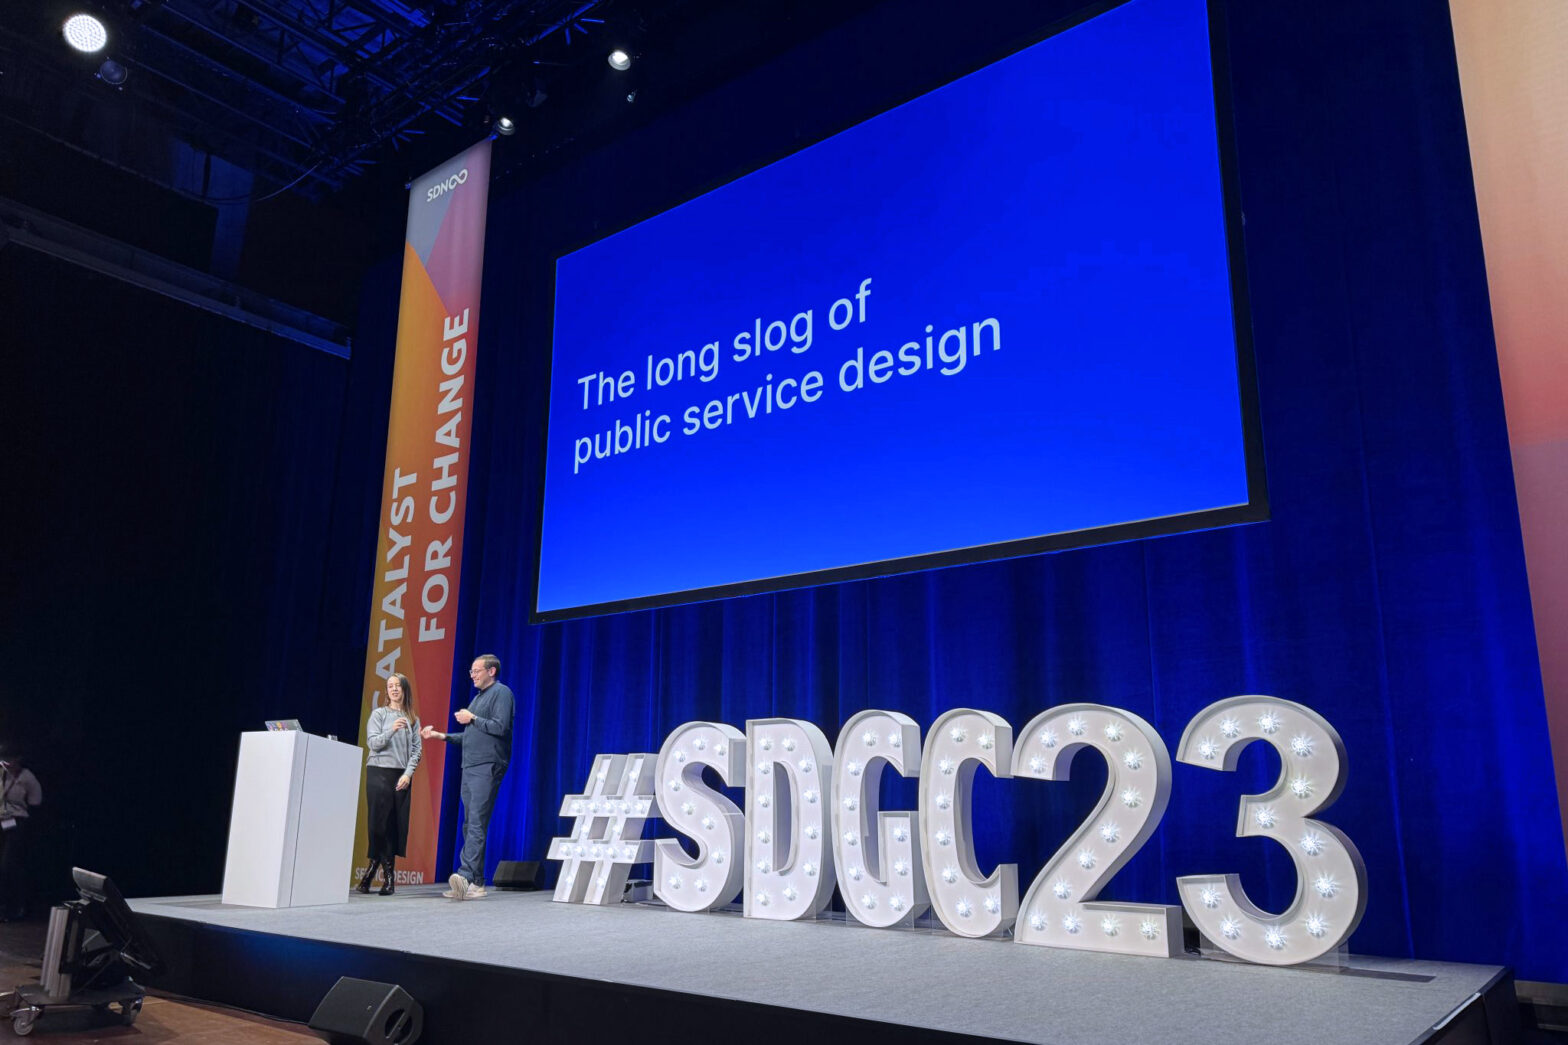 A white woman and a white man are on a big stage, behind them is a banner saying ‘catalyst for change’ and a projected slide saying ‘the long slog of public service design’, next to them are huge letters and numbers: SDGC23